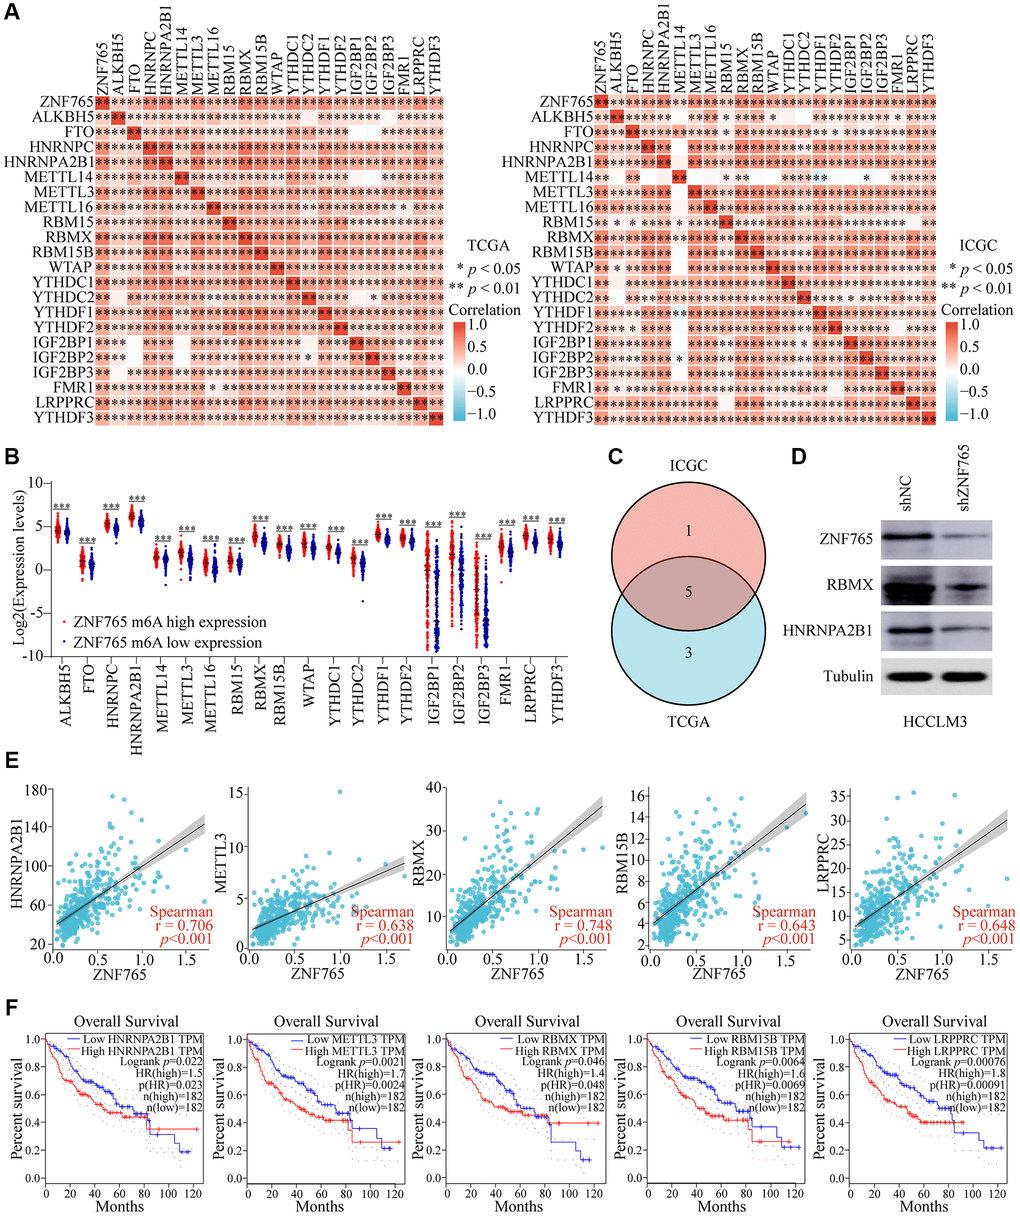 Corrections of ZNF765 expression with m6A modification in HCC. (A) The correlation between ZNF765 expression and the expression of m6A-modified genes was investigated by the Spearman statistical method using the TCGA and ICGC databases. (B) Distinct m6A-related gene expression in HCC patients with different expressions of ZNF765. (C) Five genes were found at the intersection of the TCGA and ICGC databases. (D) A Western blot was used to detect ZNF765, RBMX, and HNRNPA2B1 protein expression in HCCLM3 cells stably transfected with the control shRNA or the ZNF765 shRNA. (E) The correlation between ZNF765 and m6A-modified genes was analyzed by the scatter plot. (F) The overall survival of HCC patients was separated into two groups based on the high and low expression of these five m6A genes. *p **p ***p 